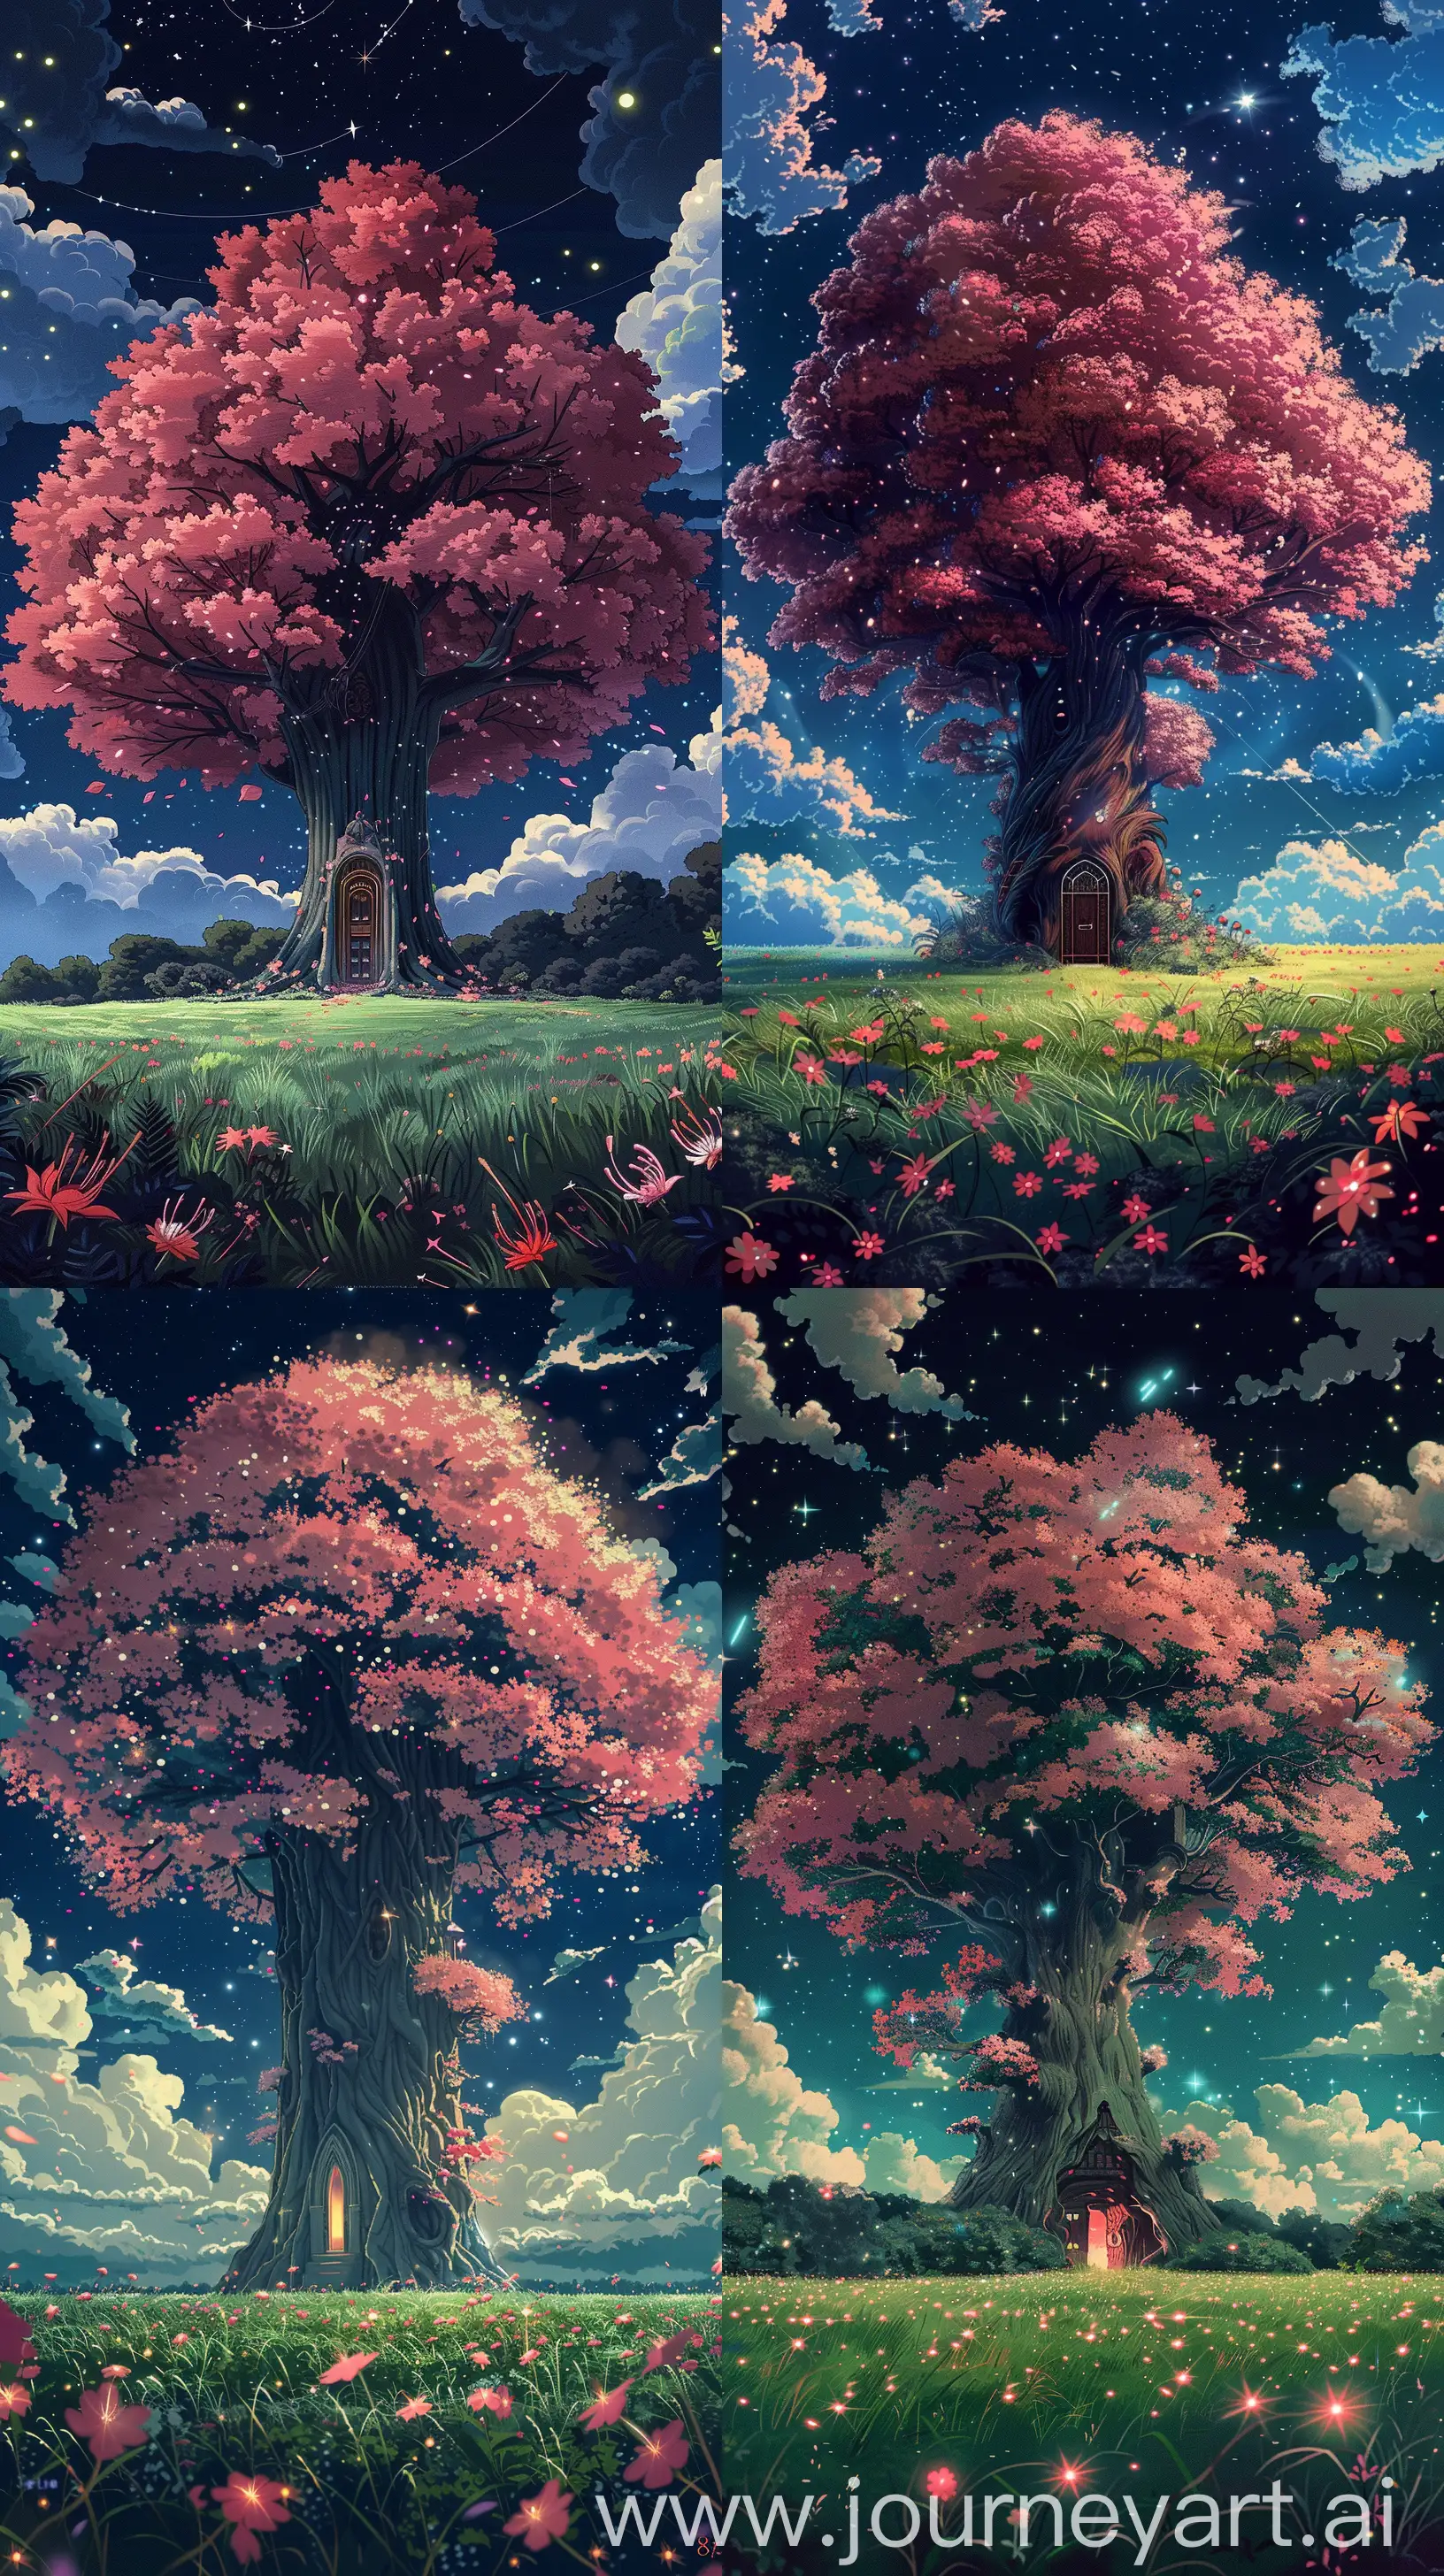 Enchanting-GhibliInspired-Nighttime-Landscape-with-Magical-Tree-and-Cosmic-Sky